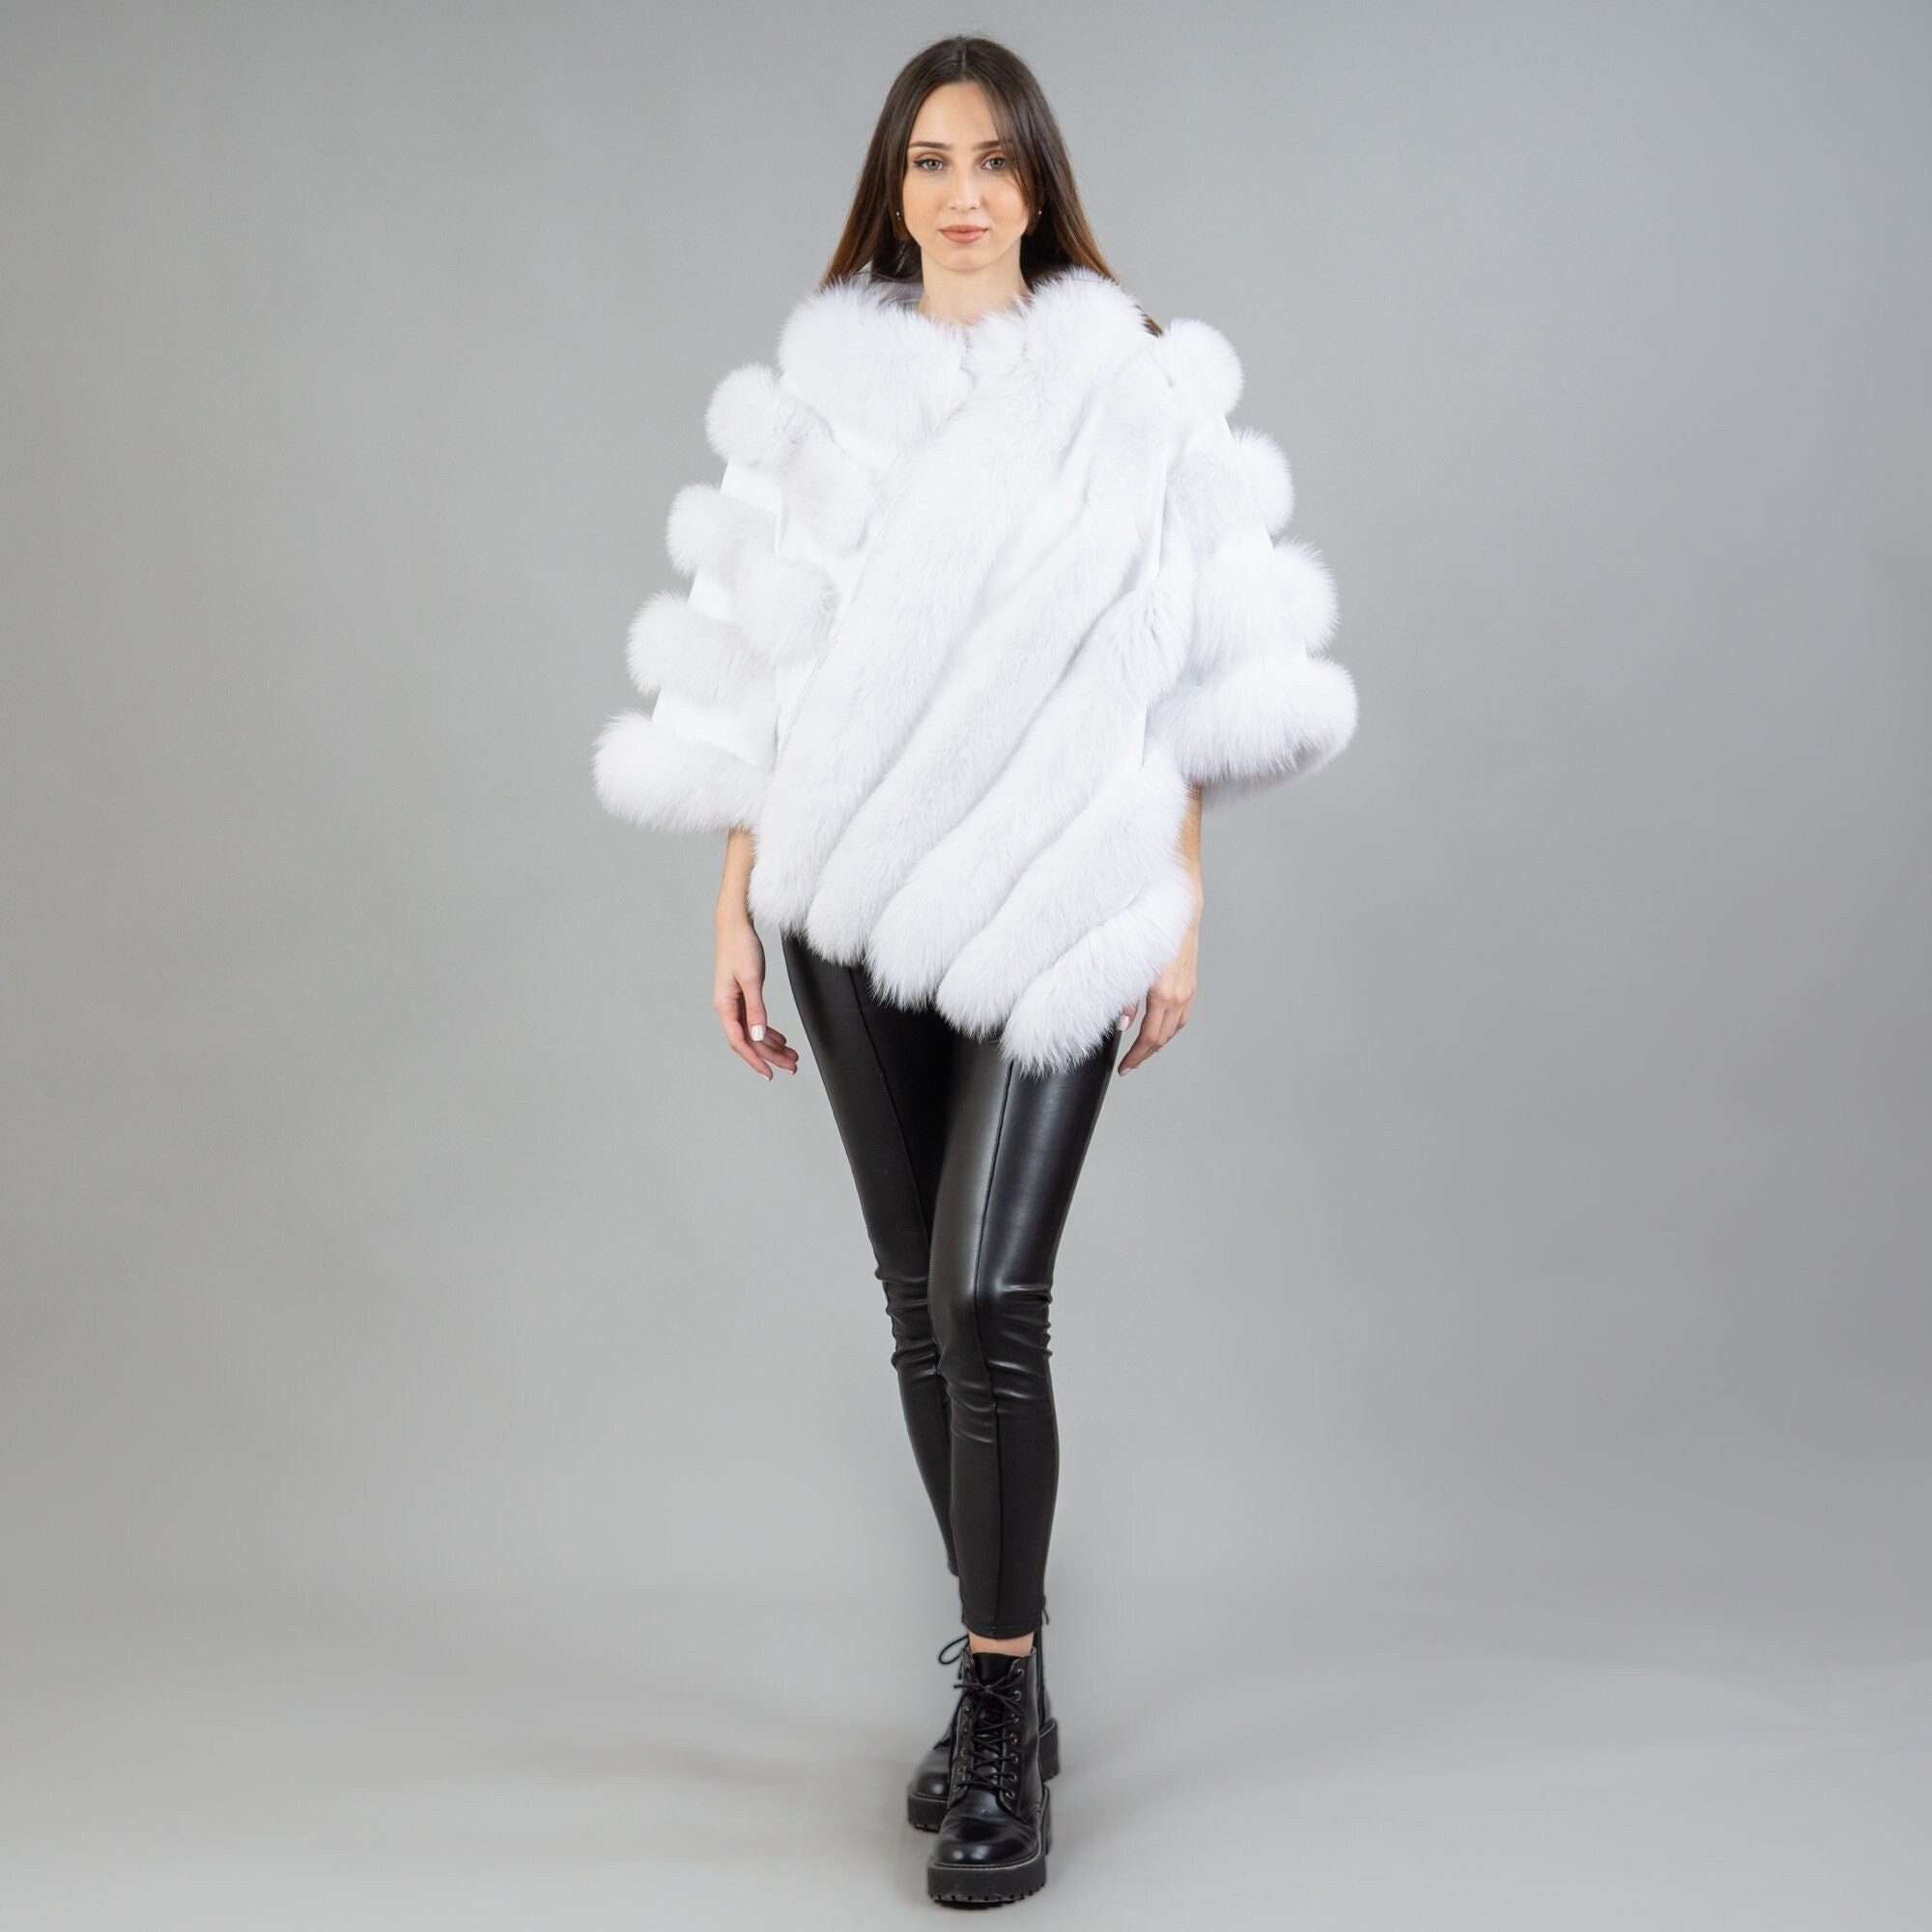 Real Fox Fur Cape Coat In White Color With Lambskin Details Womens Winter Coats Warmthumbnail